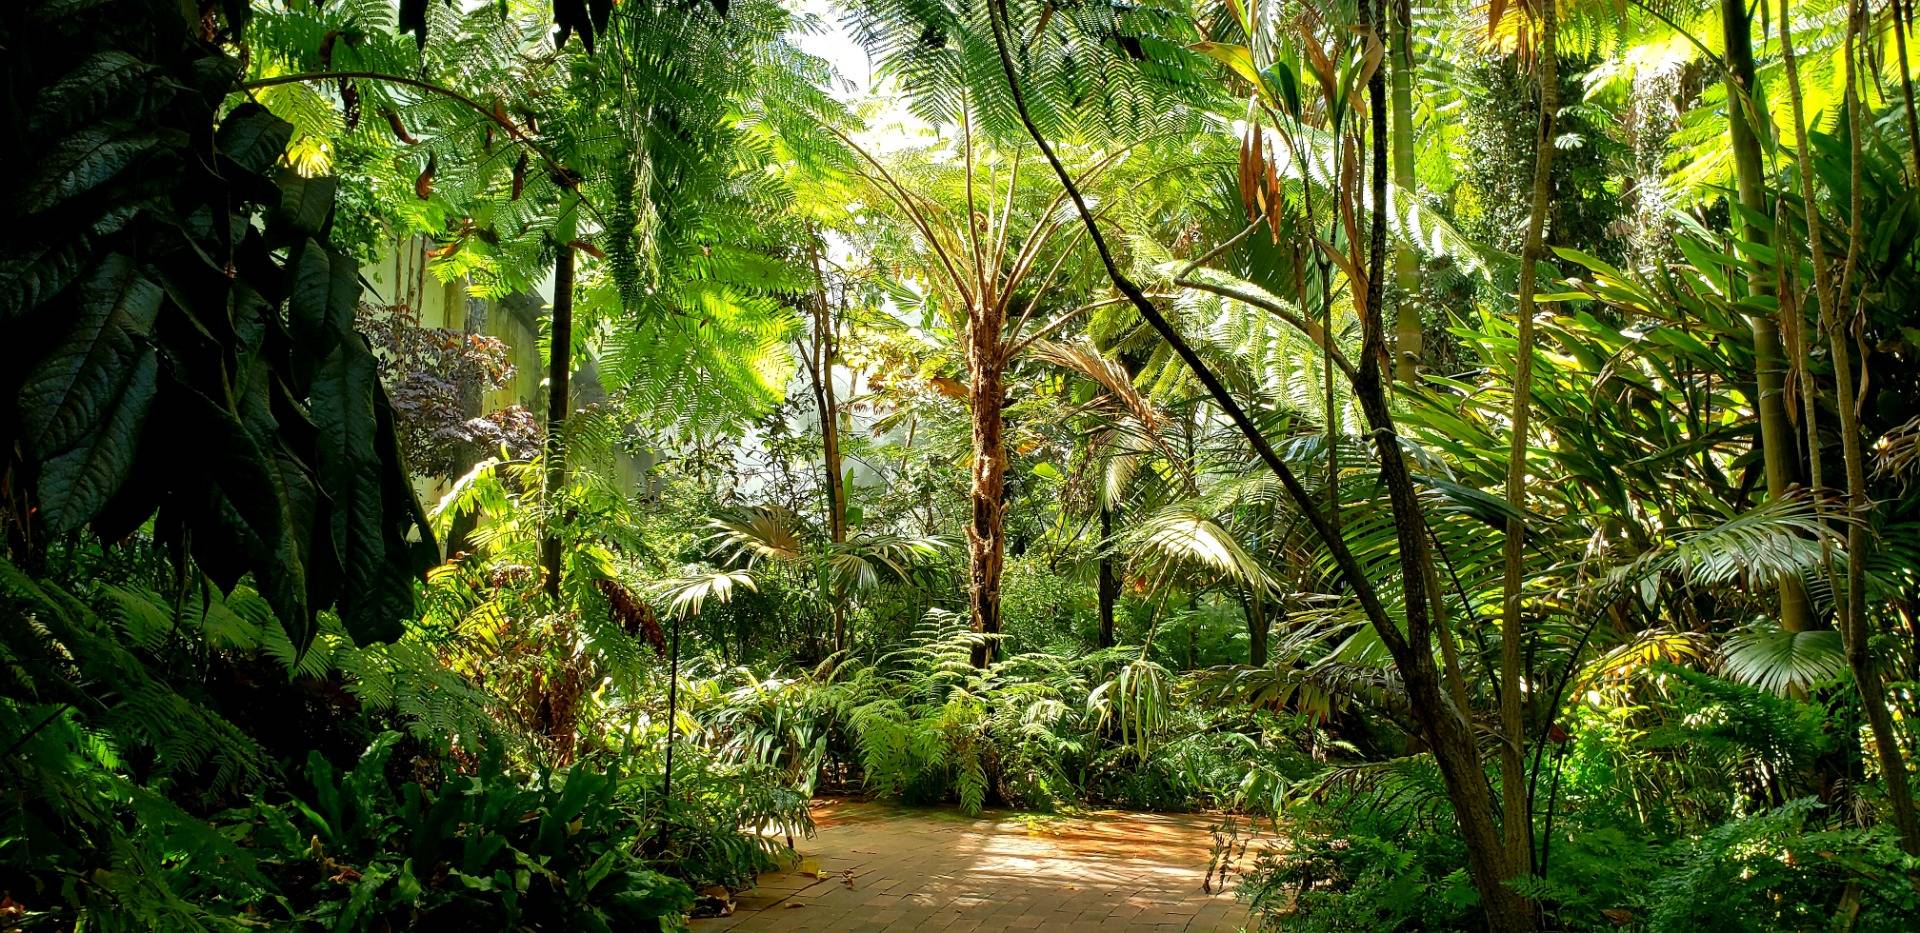 Adelaide Botanic Garden - a place to calm your mind and move your body